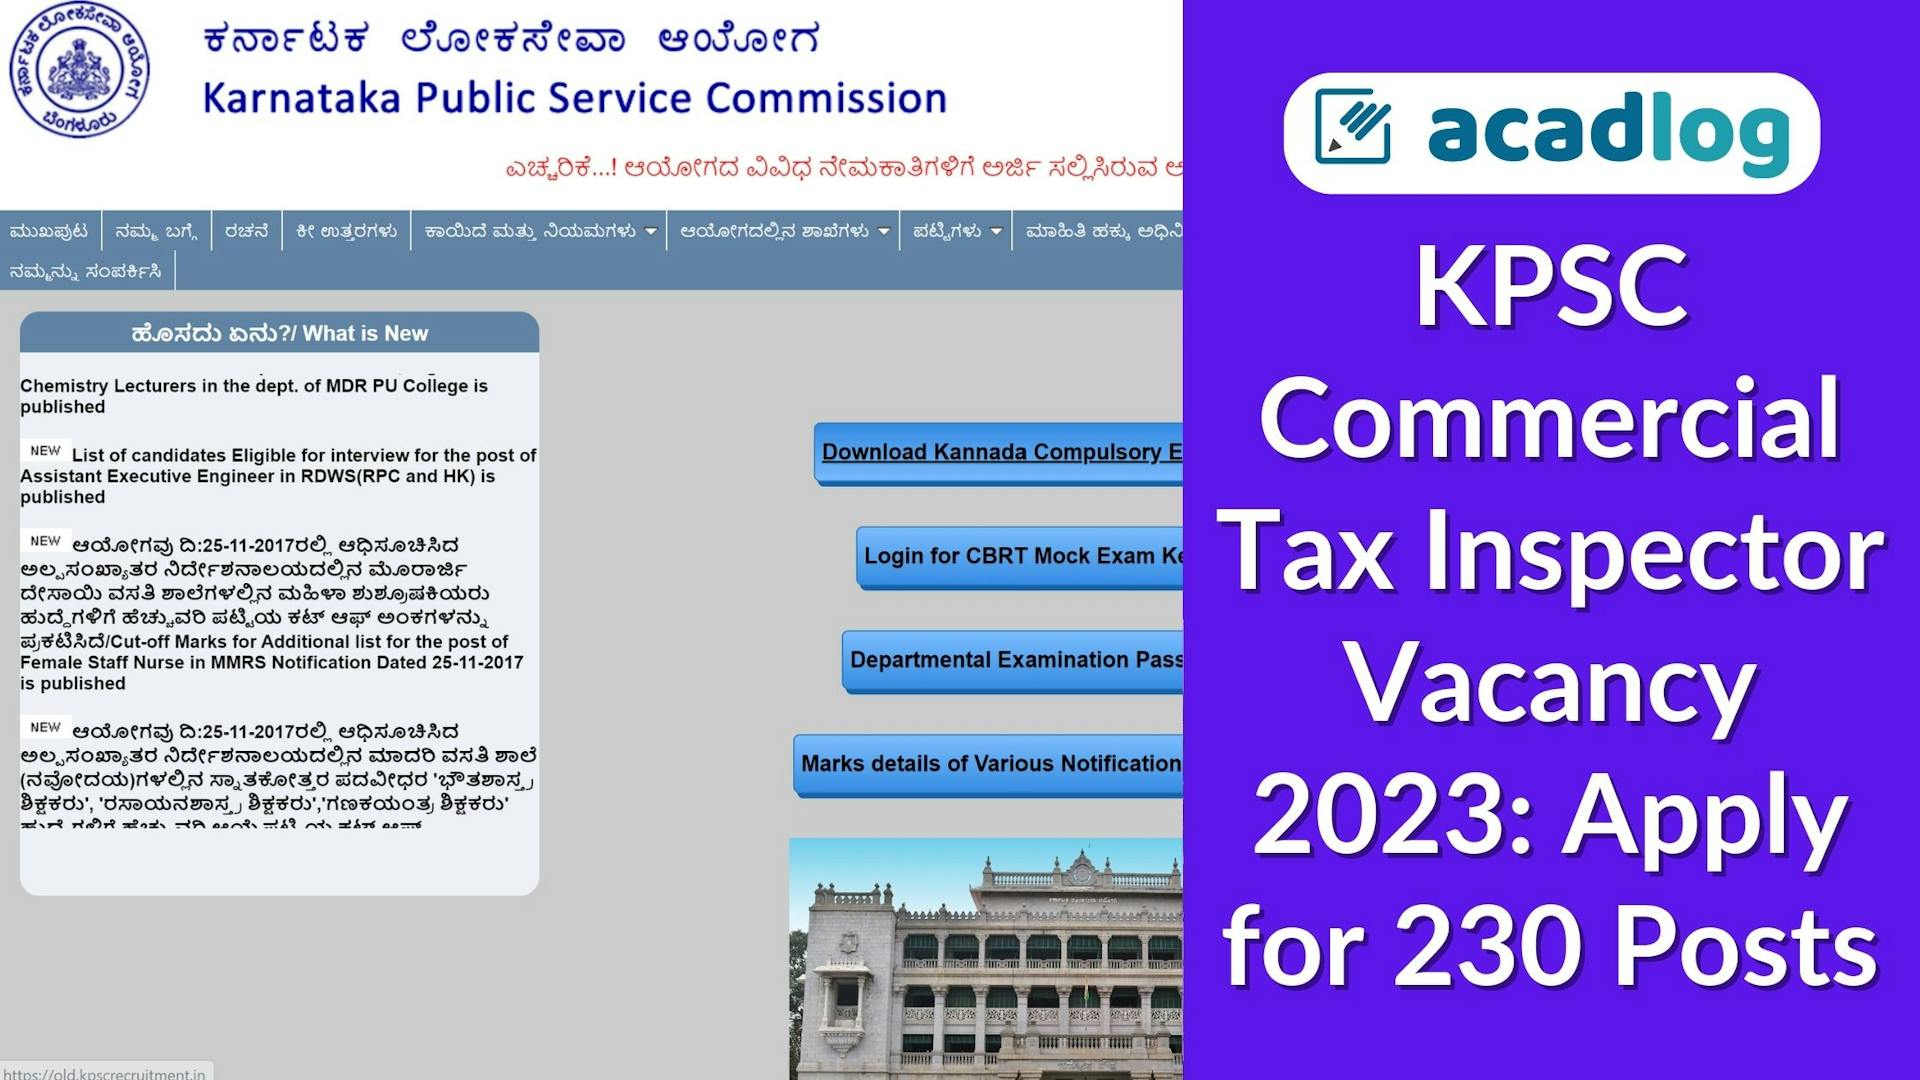 KPSC Commercial Tax Inspector Vacancy 2023: Apply for 230 Posts